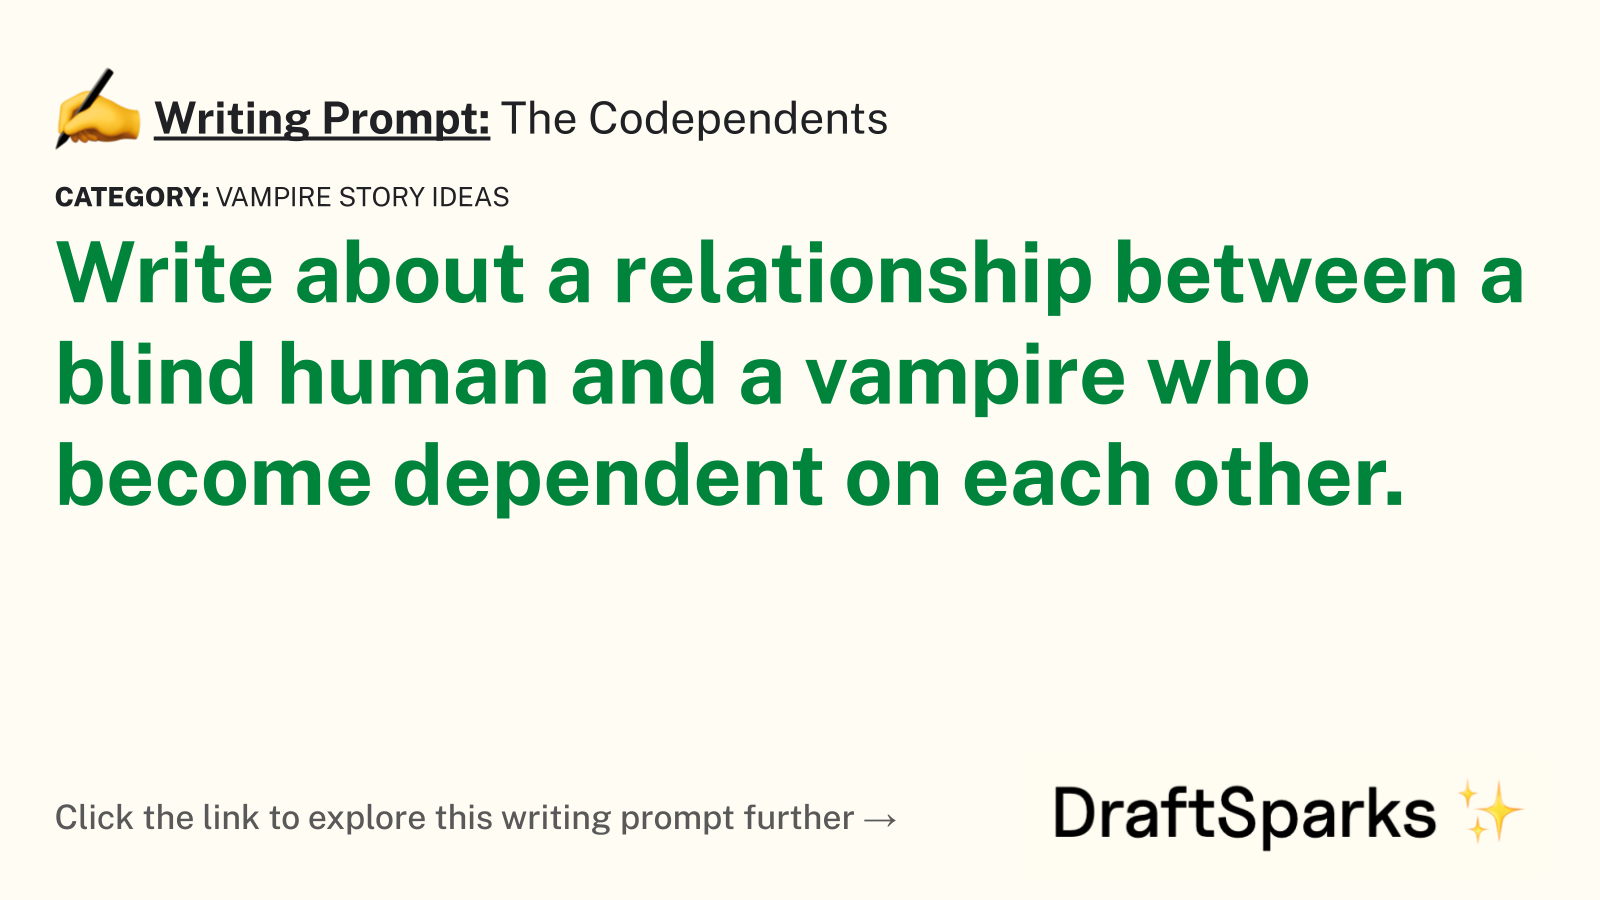 The Codependents